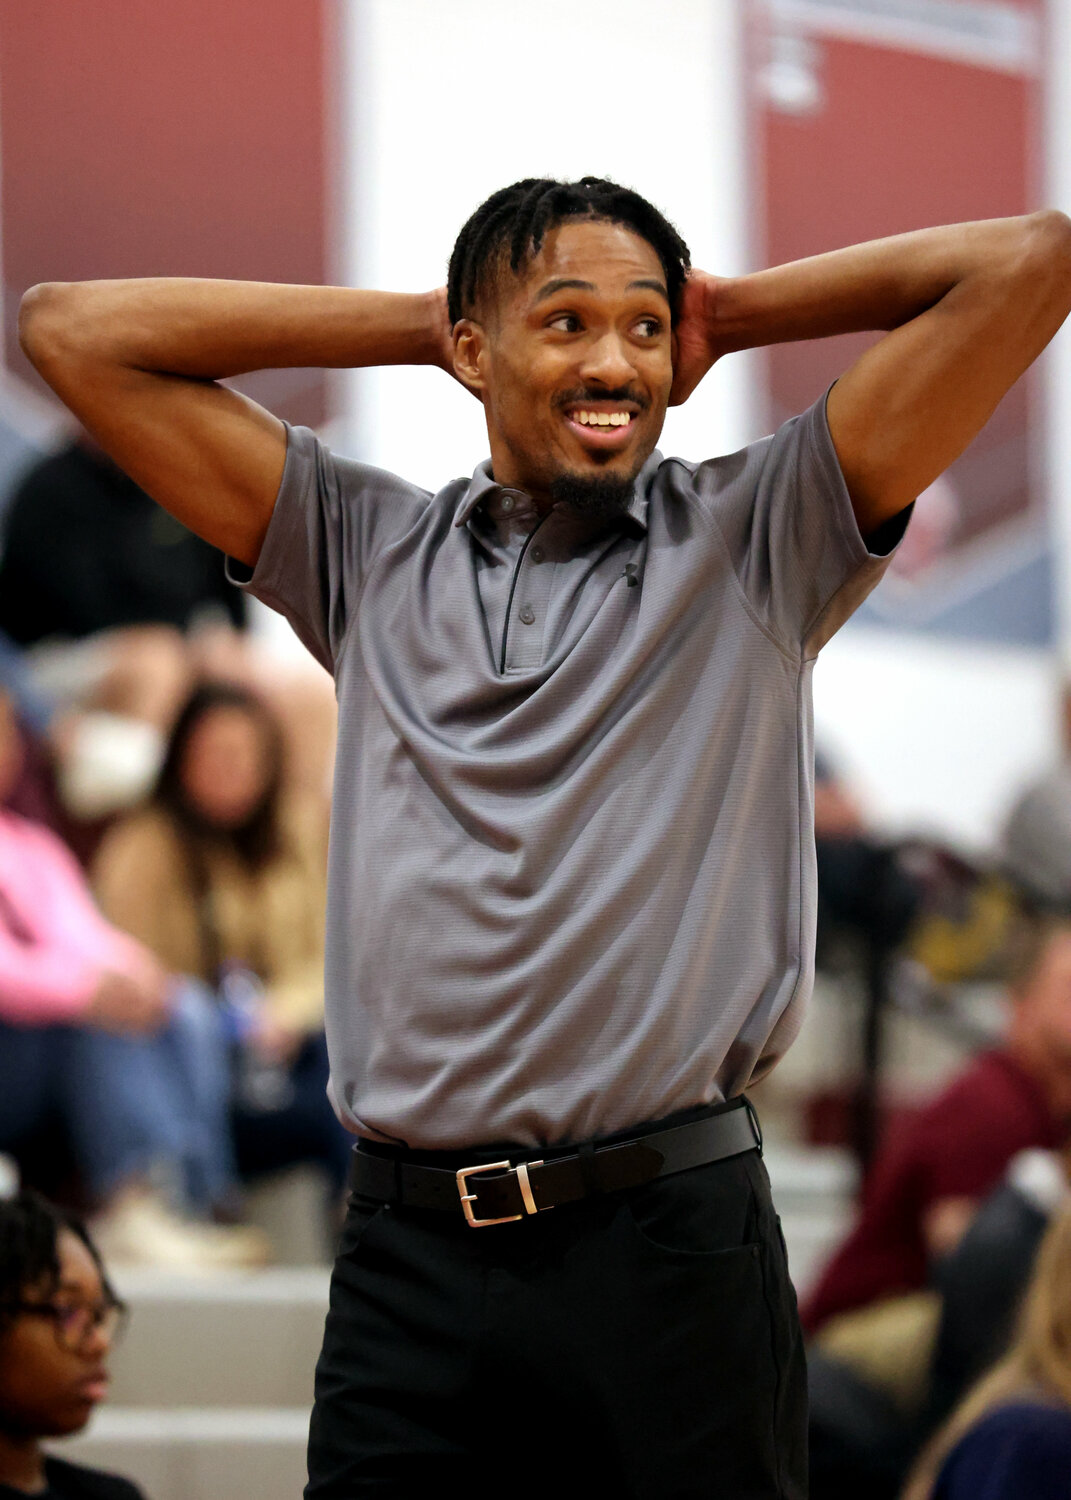 Coach Charles Byrd reacts to a call during the Seaforth girl’s basketball opener. The Hawks cruised to victory over St. Pauls, 64-26.